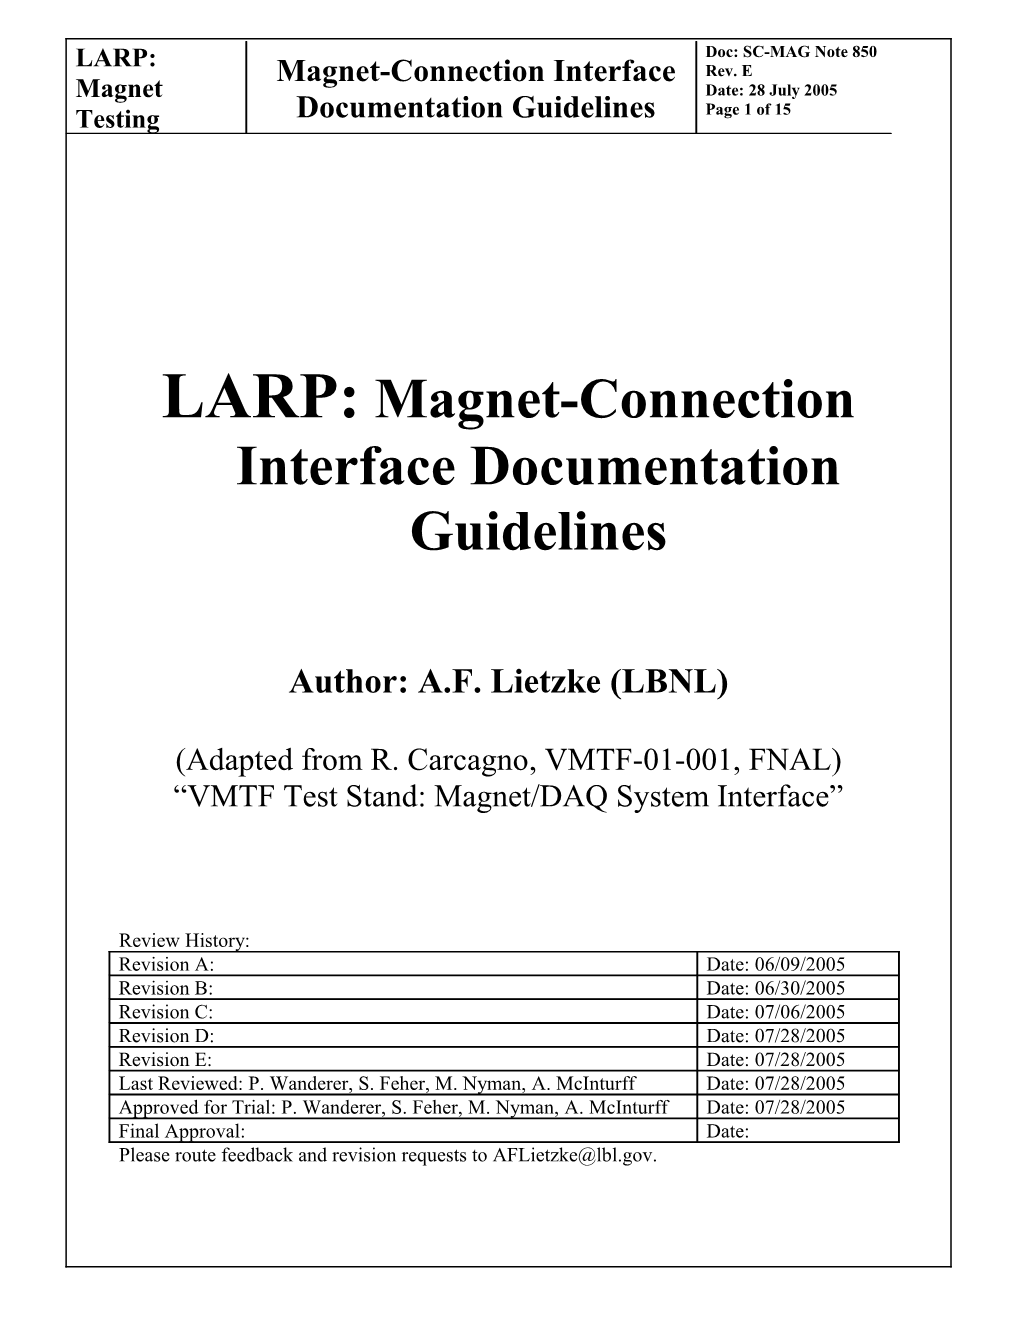 LARP Magnet, DAQ-Connectopr Interface Guidelines and Template